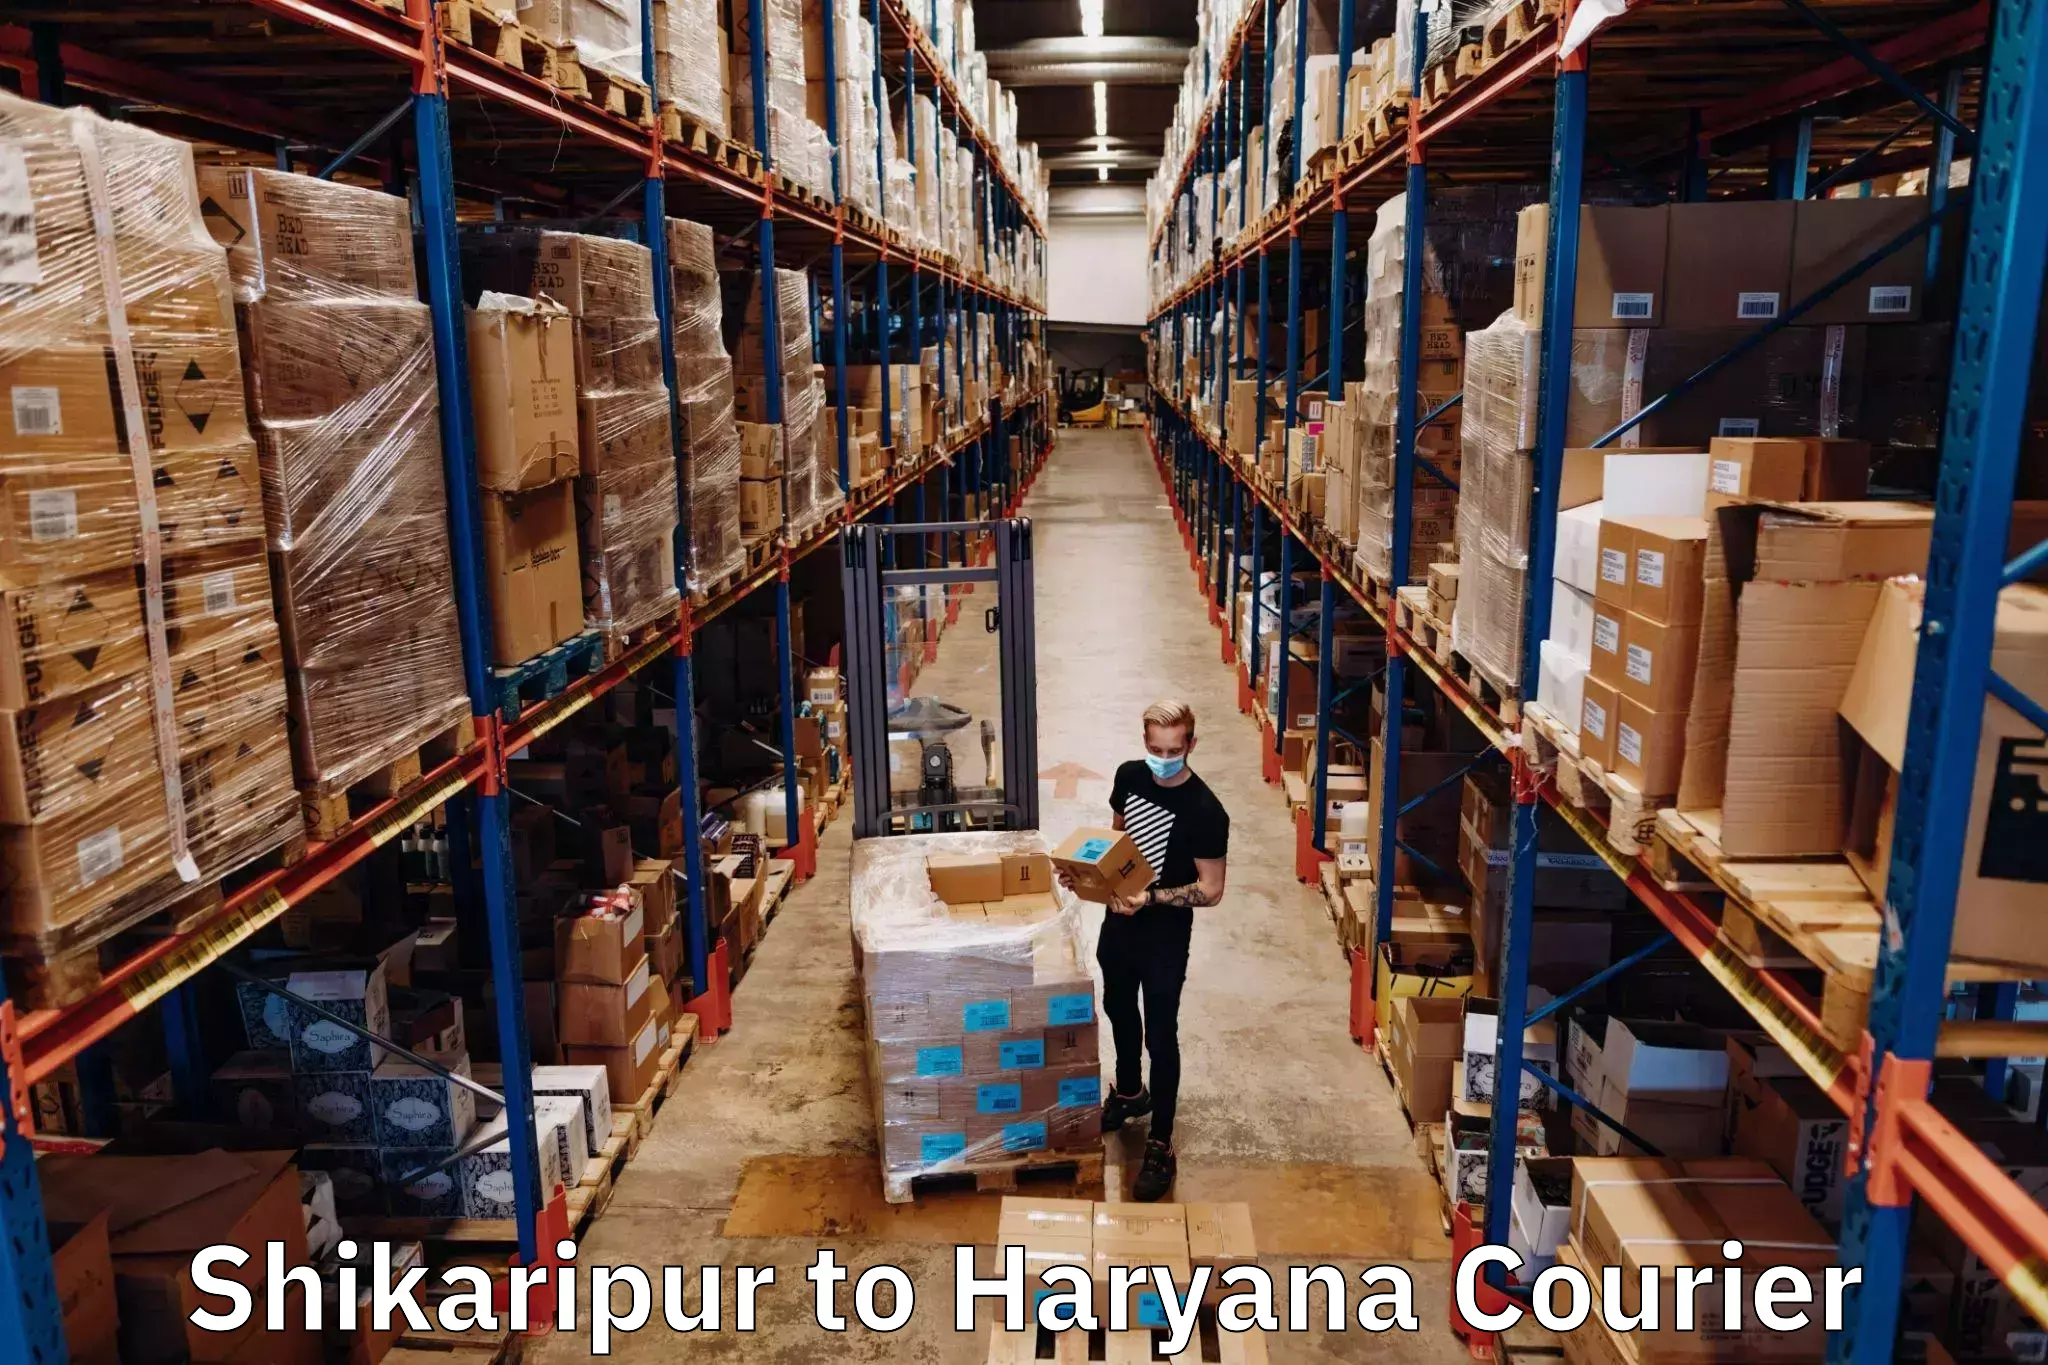 On-demand courier in Shikaripur to Chaudhary Charan Singh Haryana Agricultural University Hisar